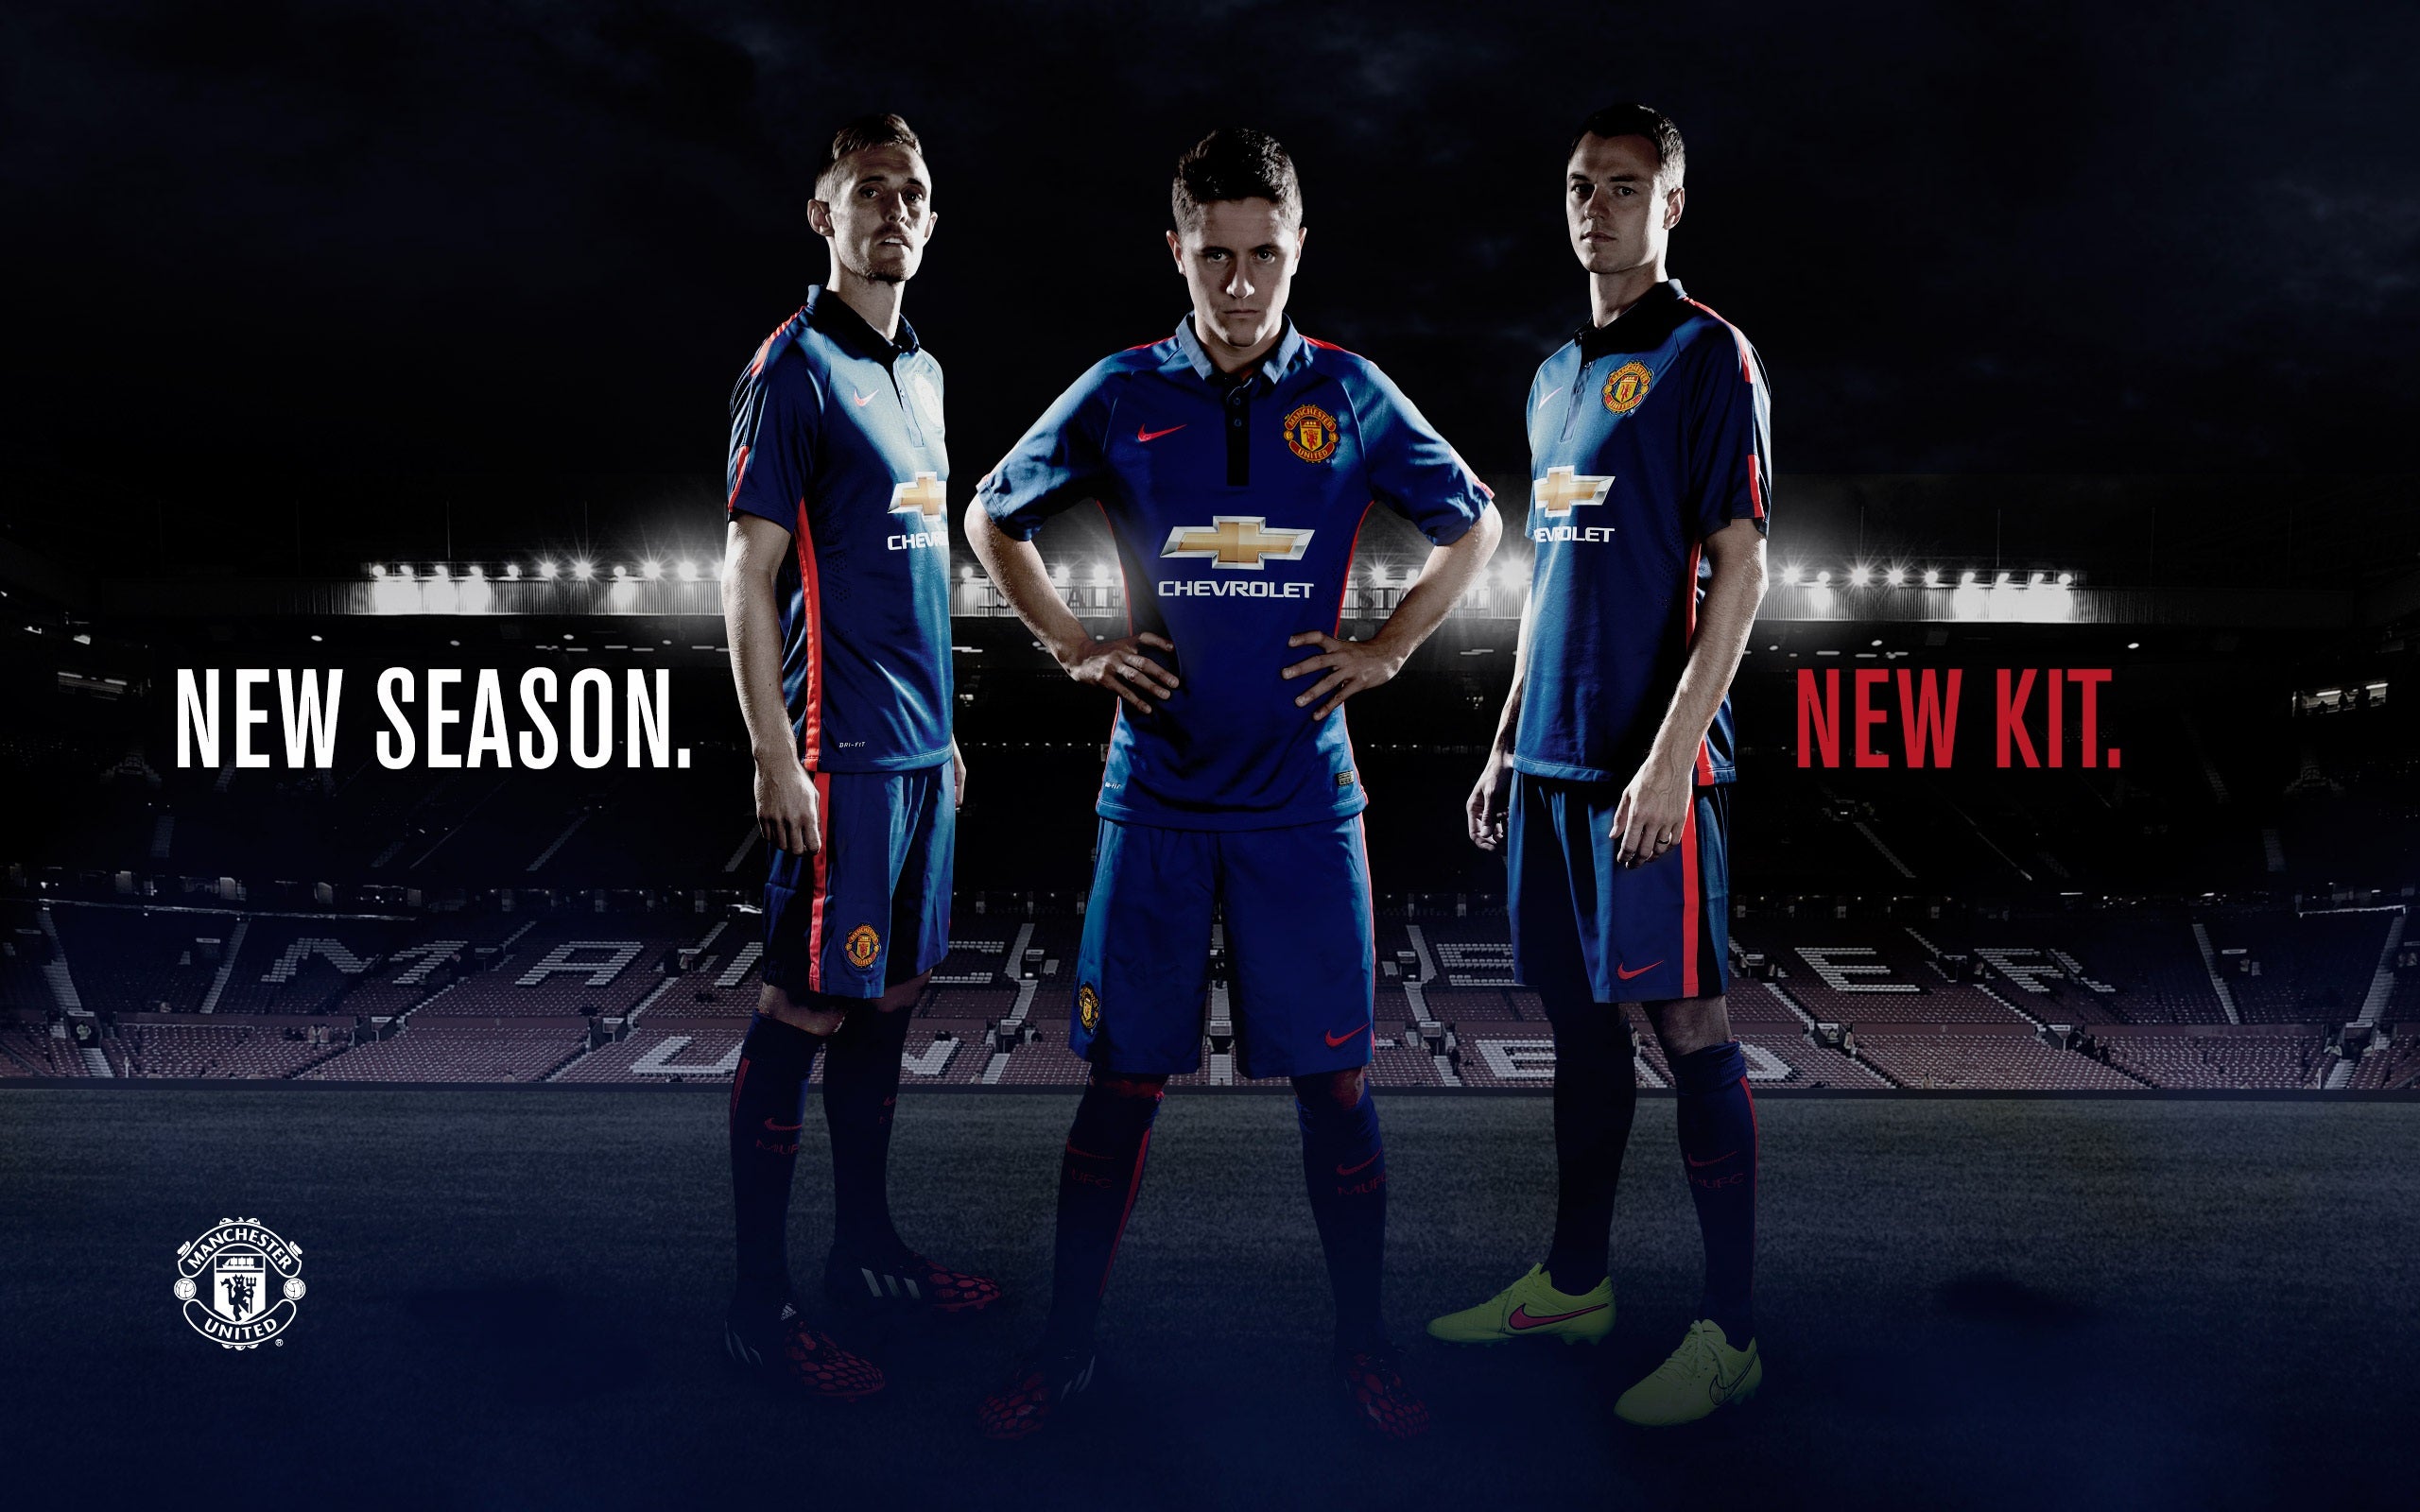 The new Manchester United third kit